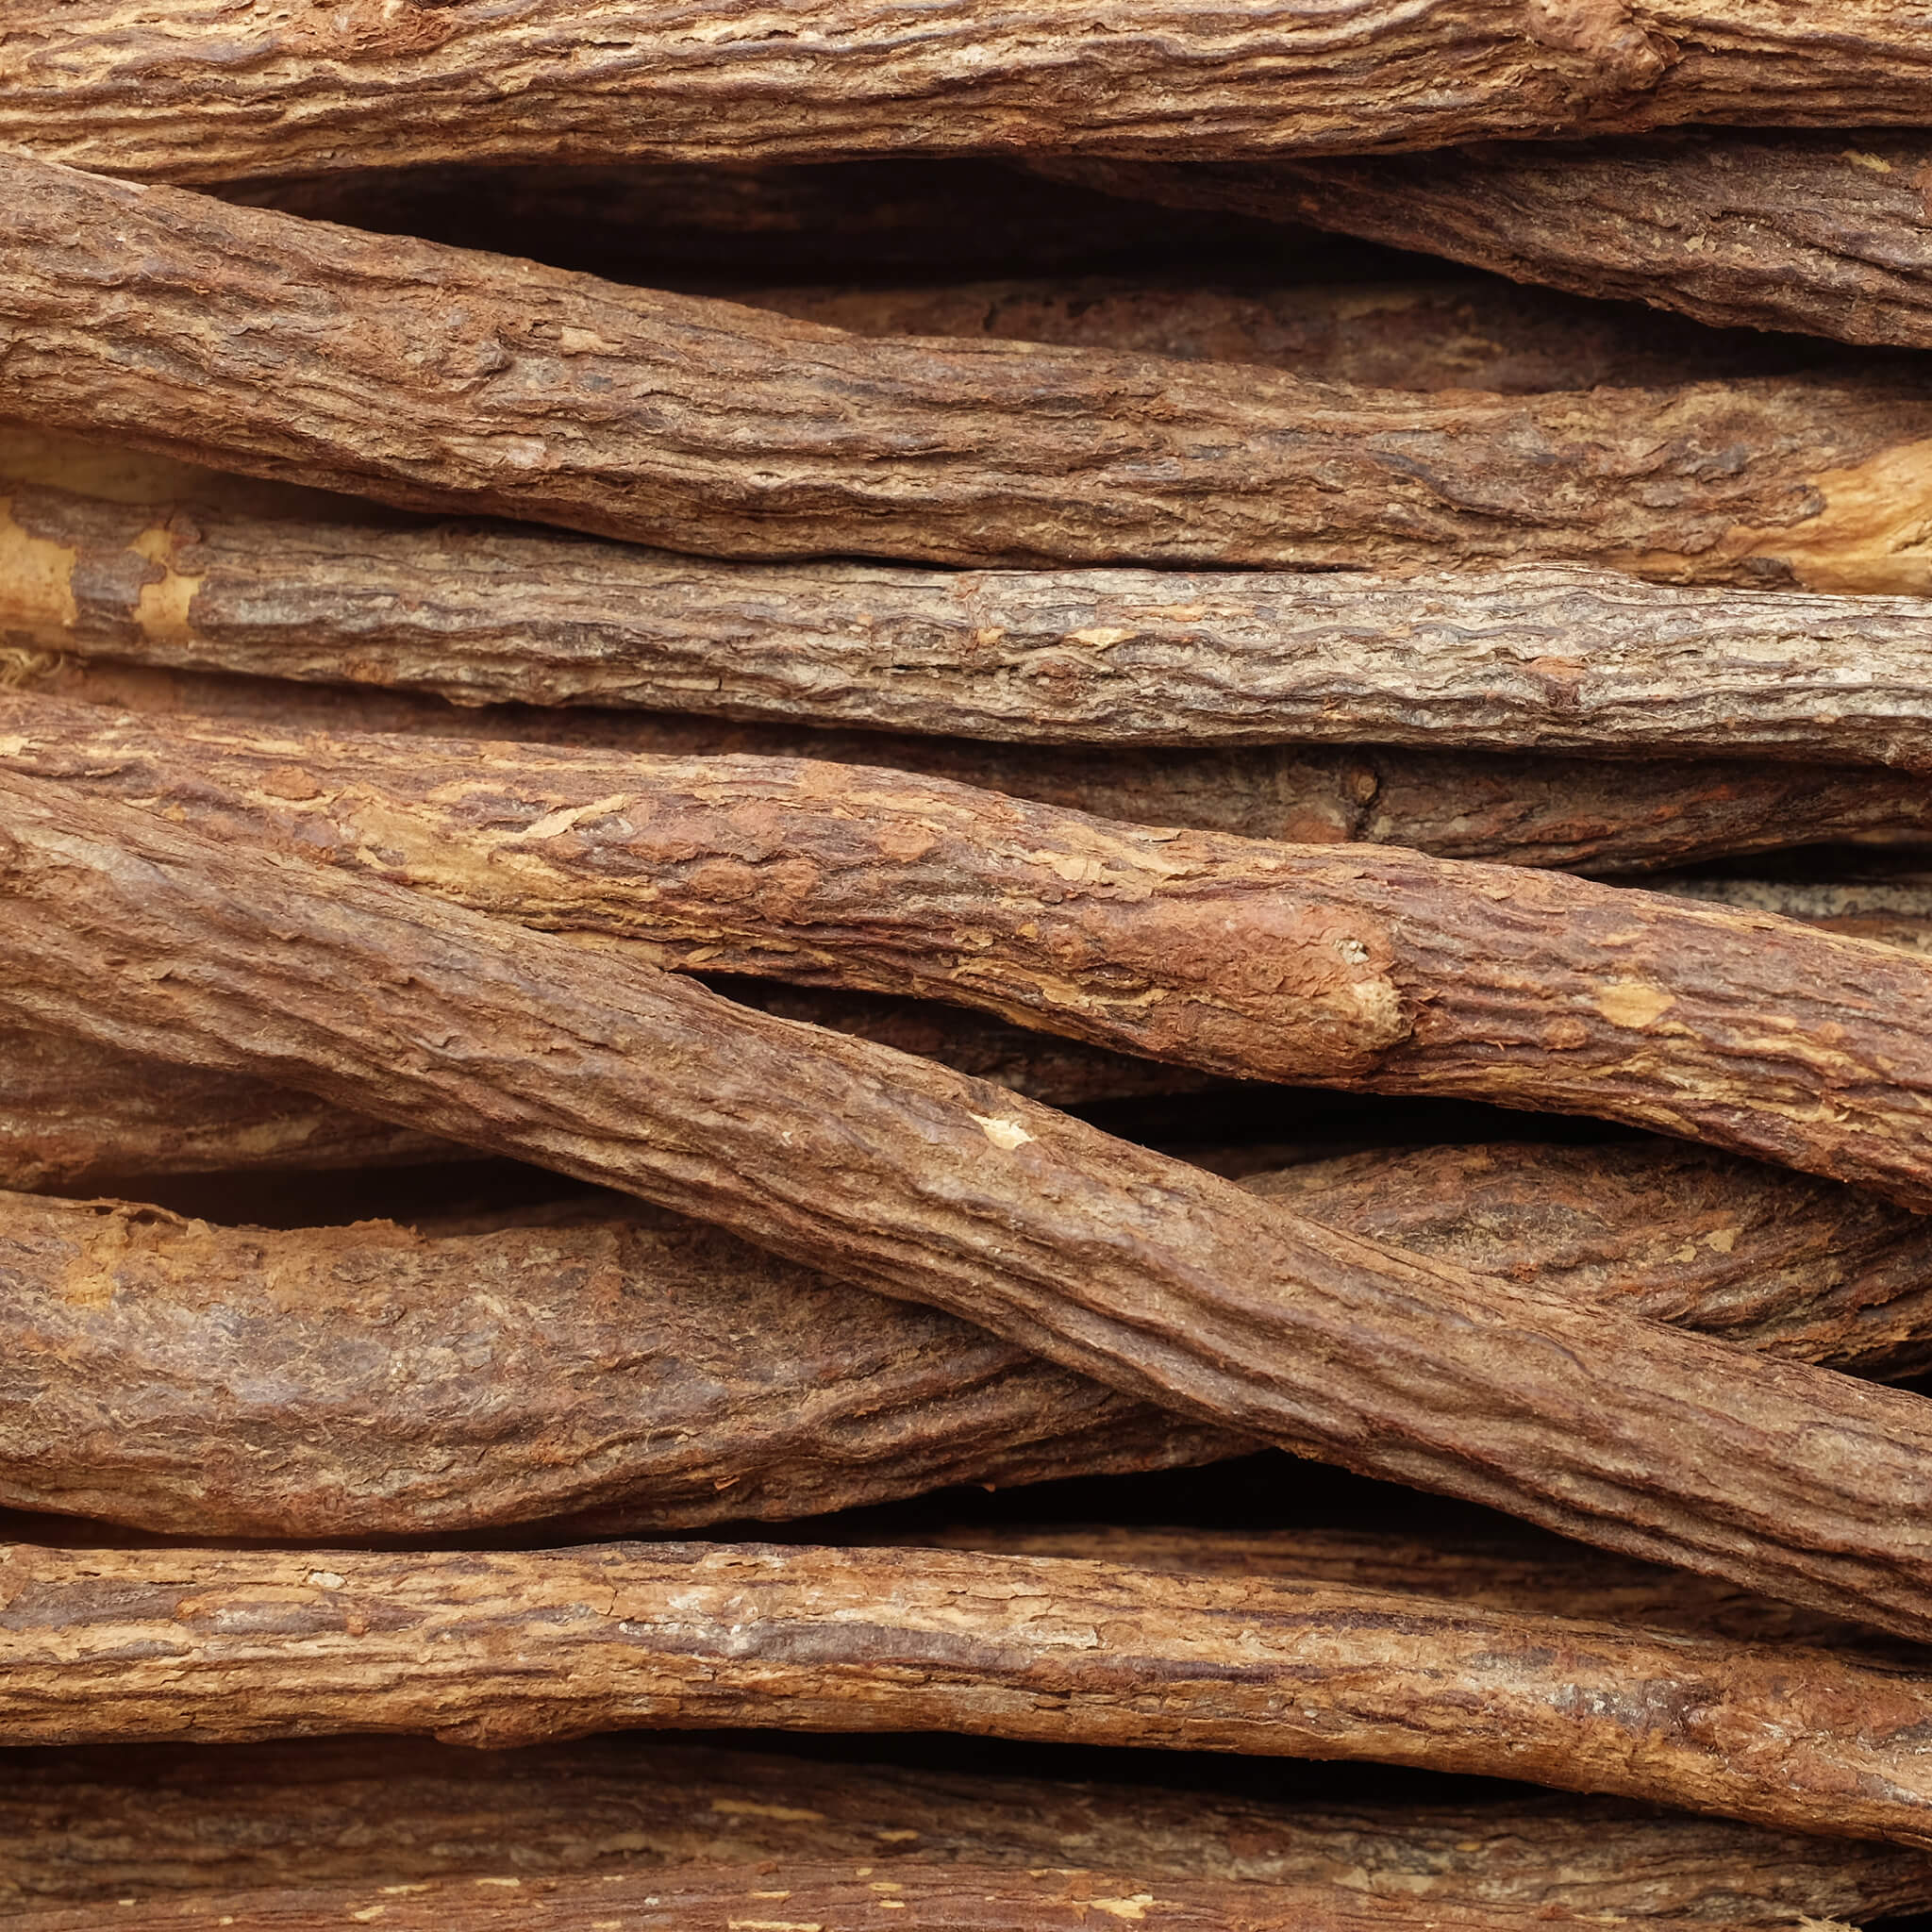 Product Page Key Ingredients: Licorice Root